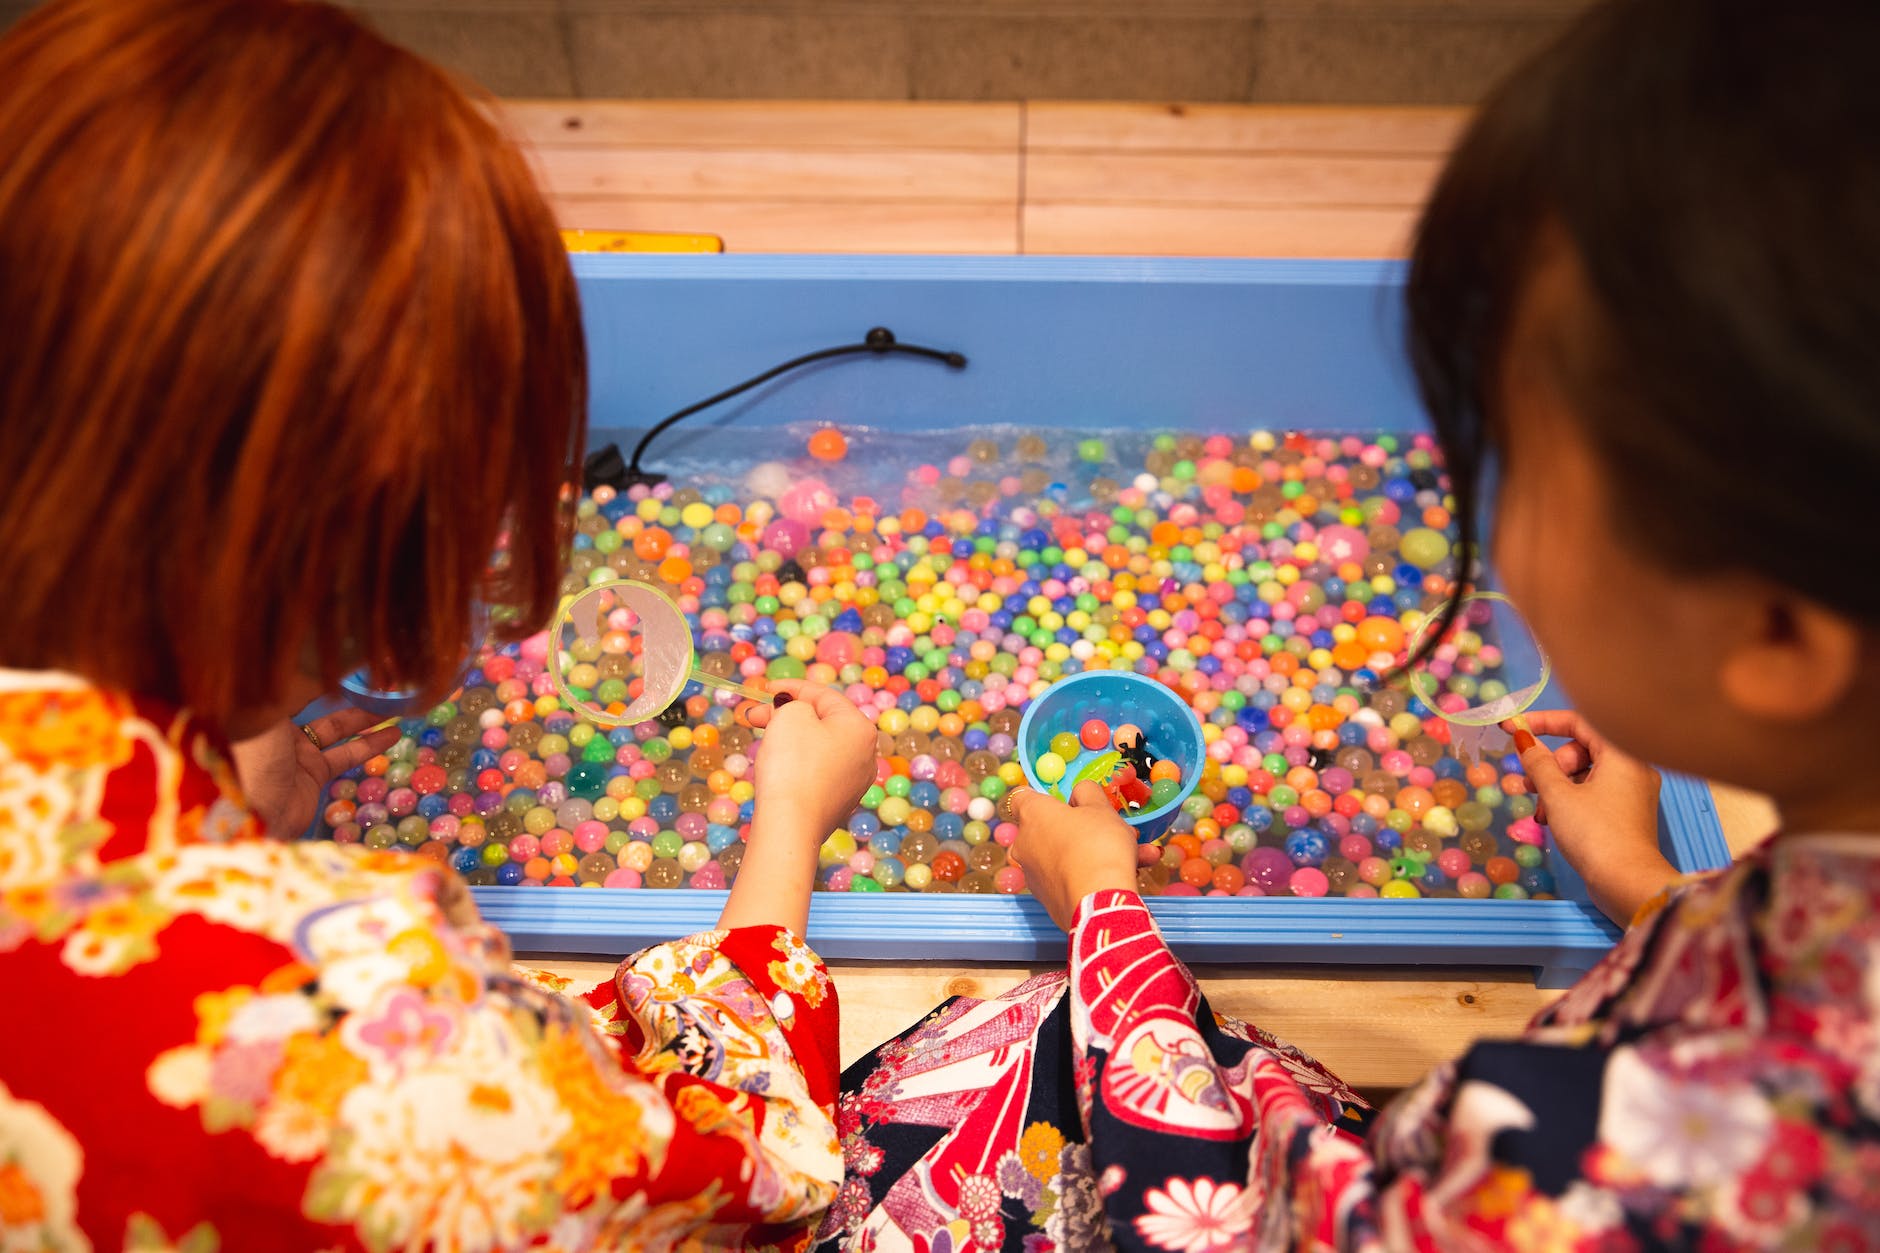 Parents and childcare settings warned to keep waterbeads away from